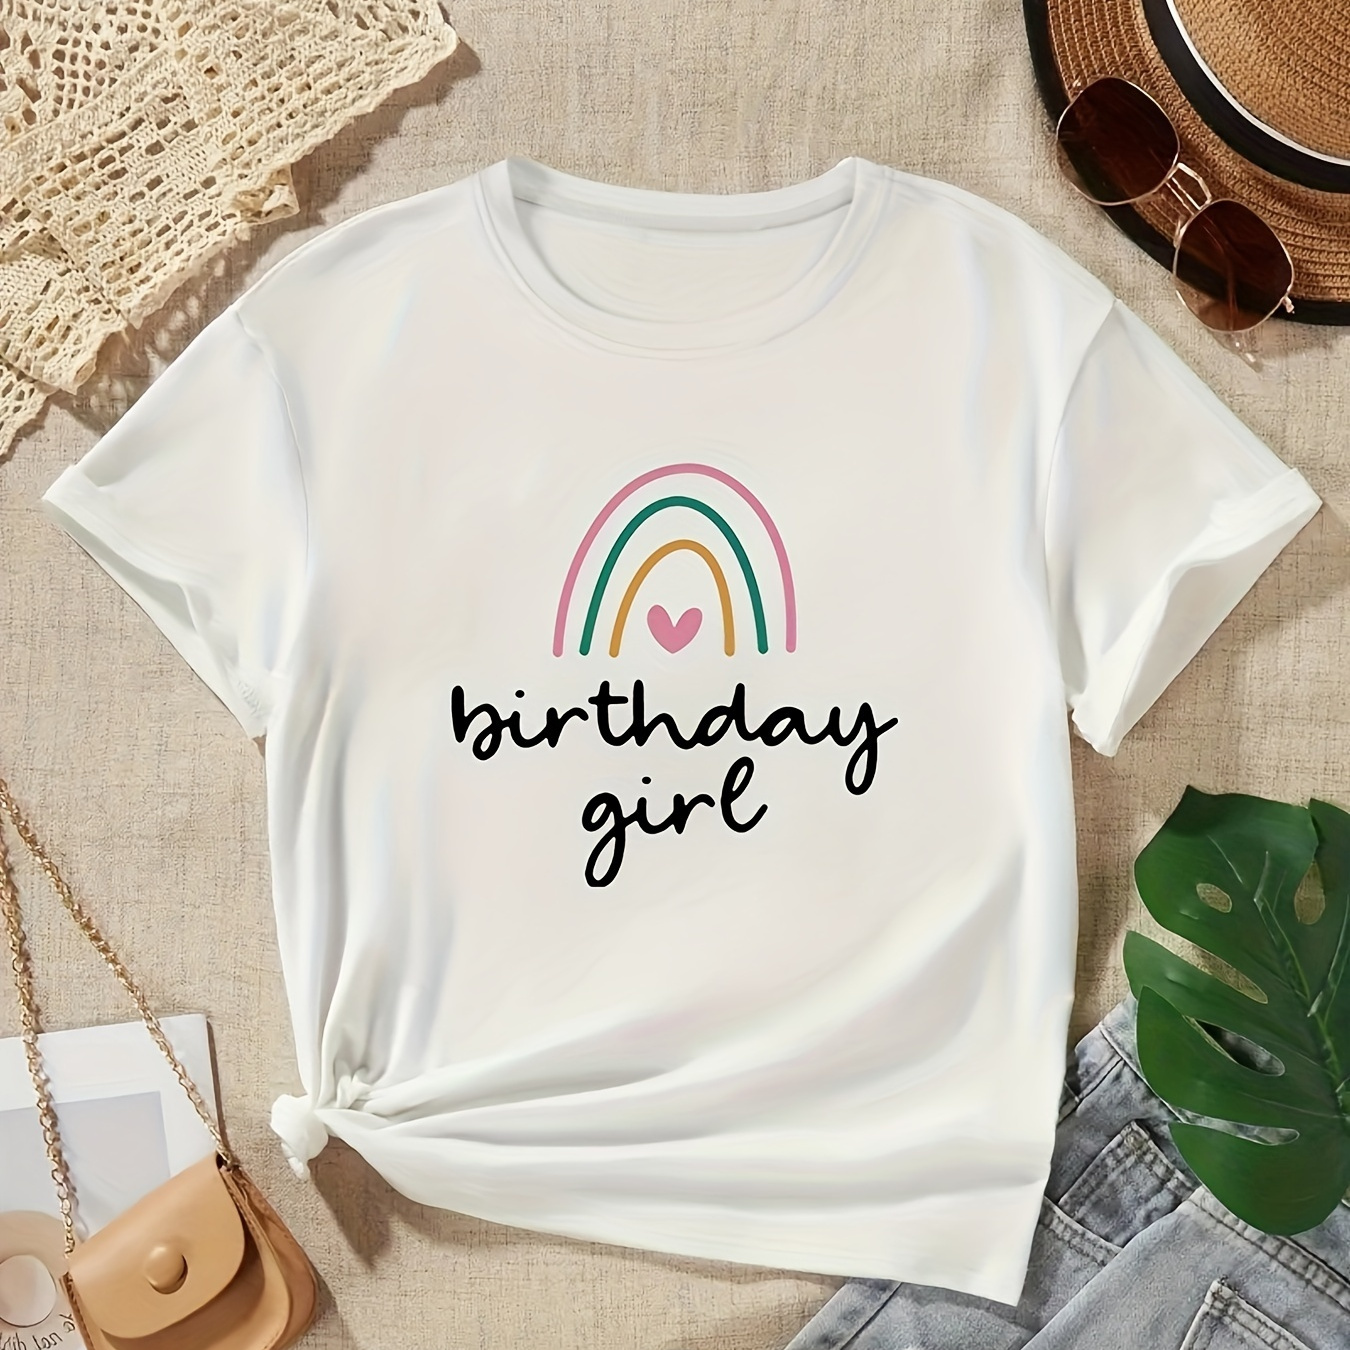 

Graffiti Birthday Girl With Cartoon Pastel Rainbow Graphic Print, Girls' Casual Crew Neck Short Sleeve T-shirts, Comfy Top Clothes For Spring And Summer For Exercise